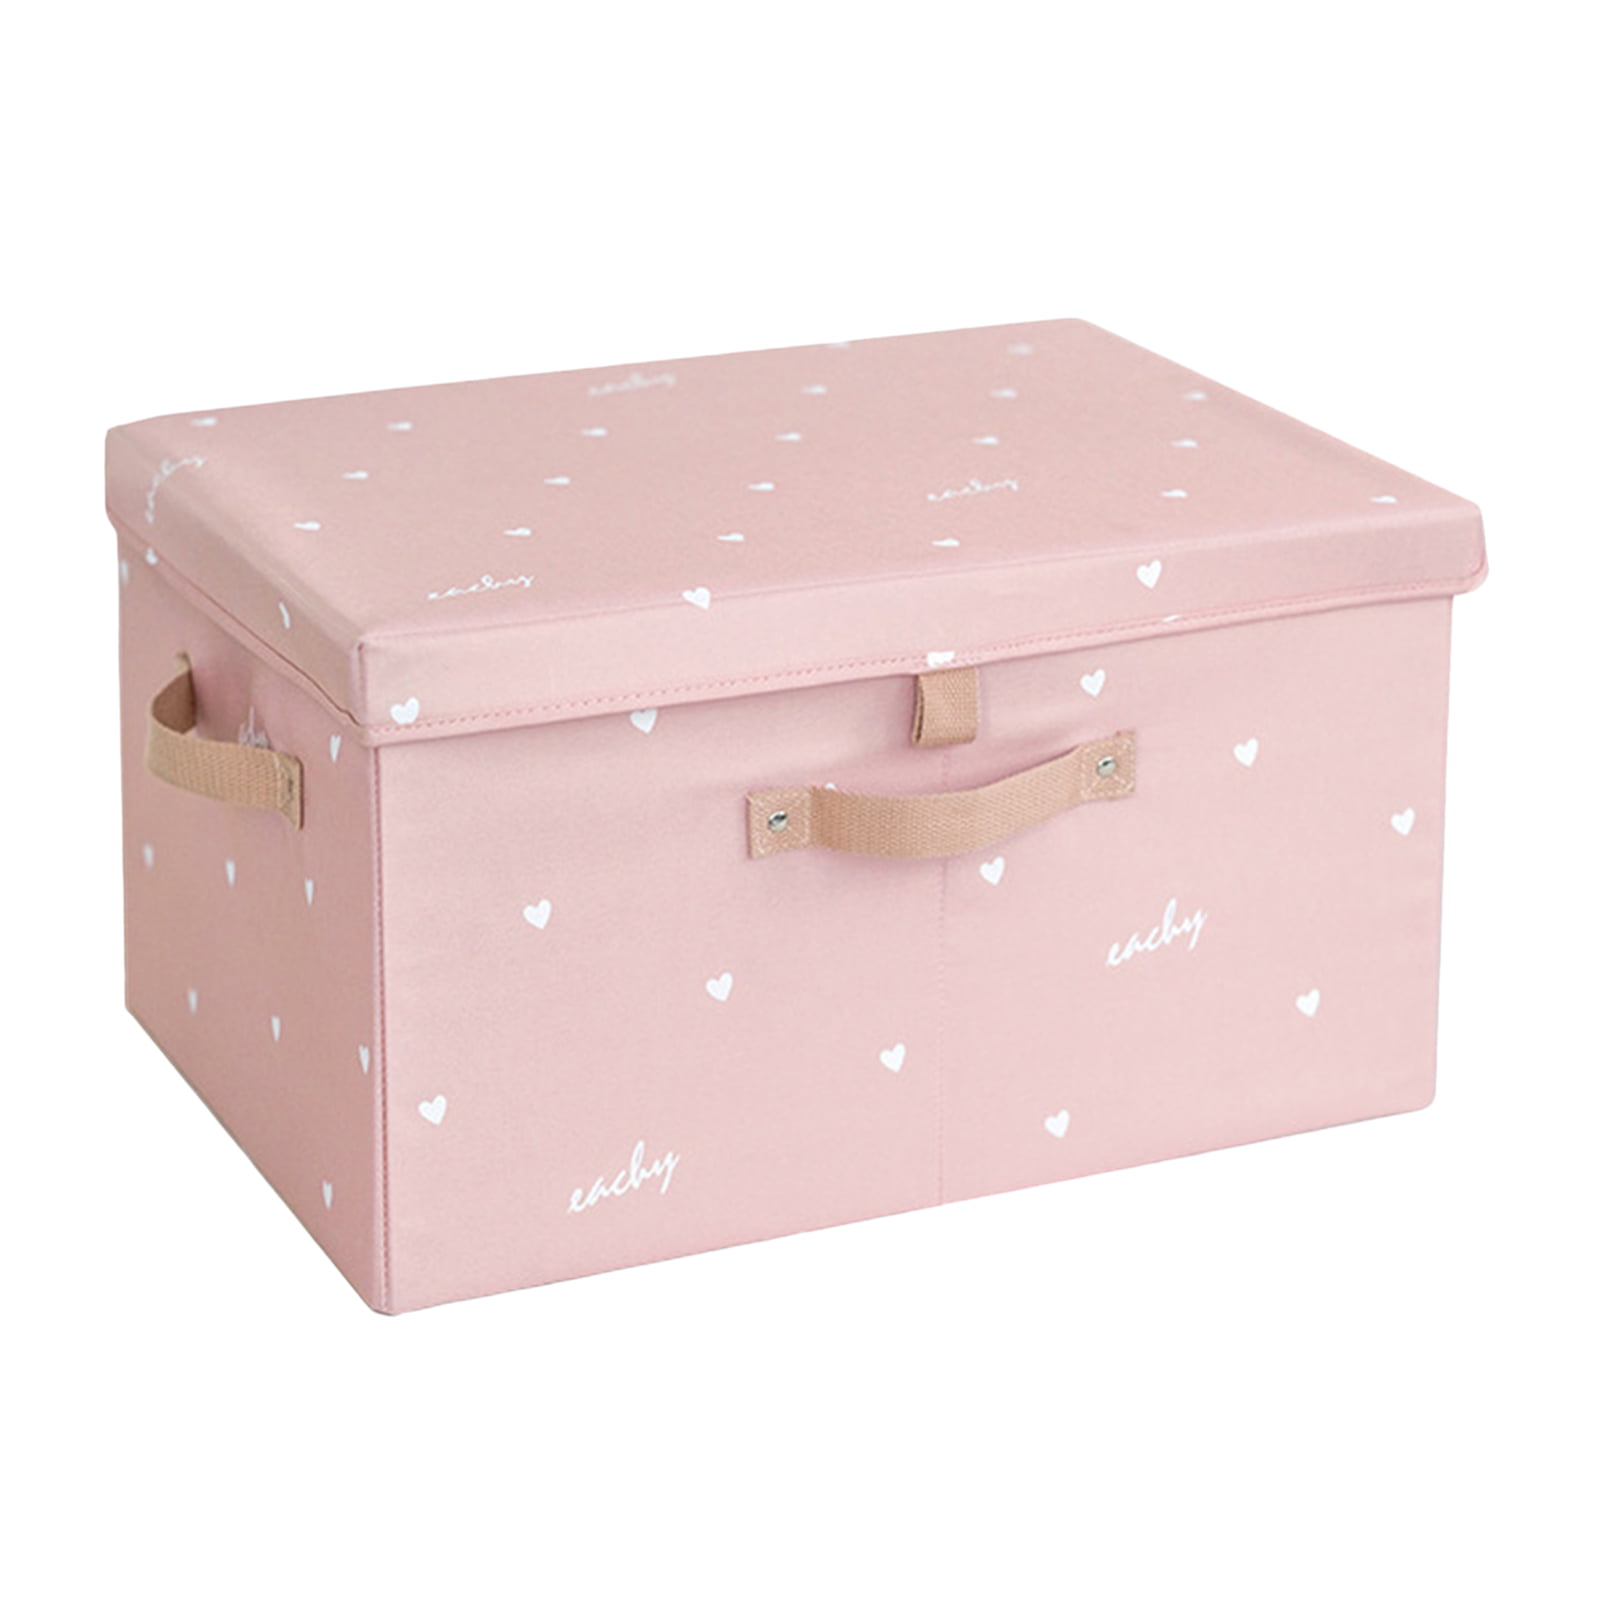 Details about   PINK Collapsible Storage Cube Bins Containers Handles 10.5"x11"x10.5" BRAND NEW 